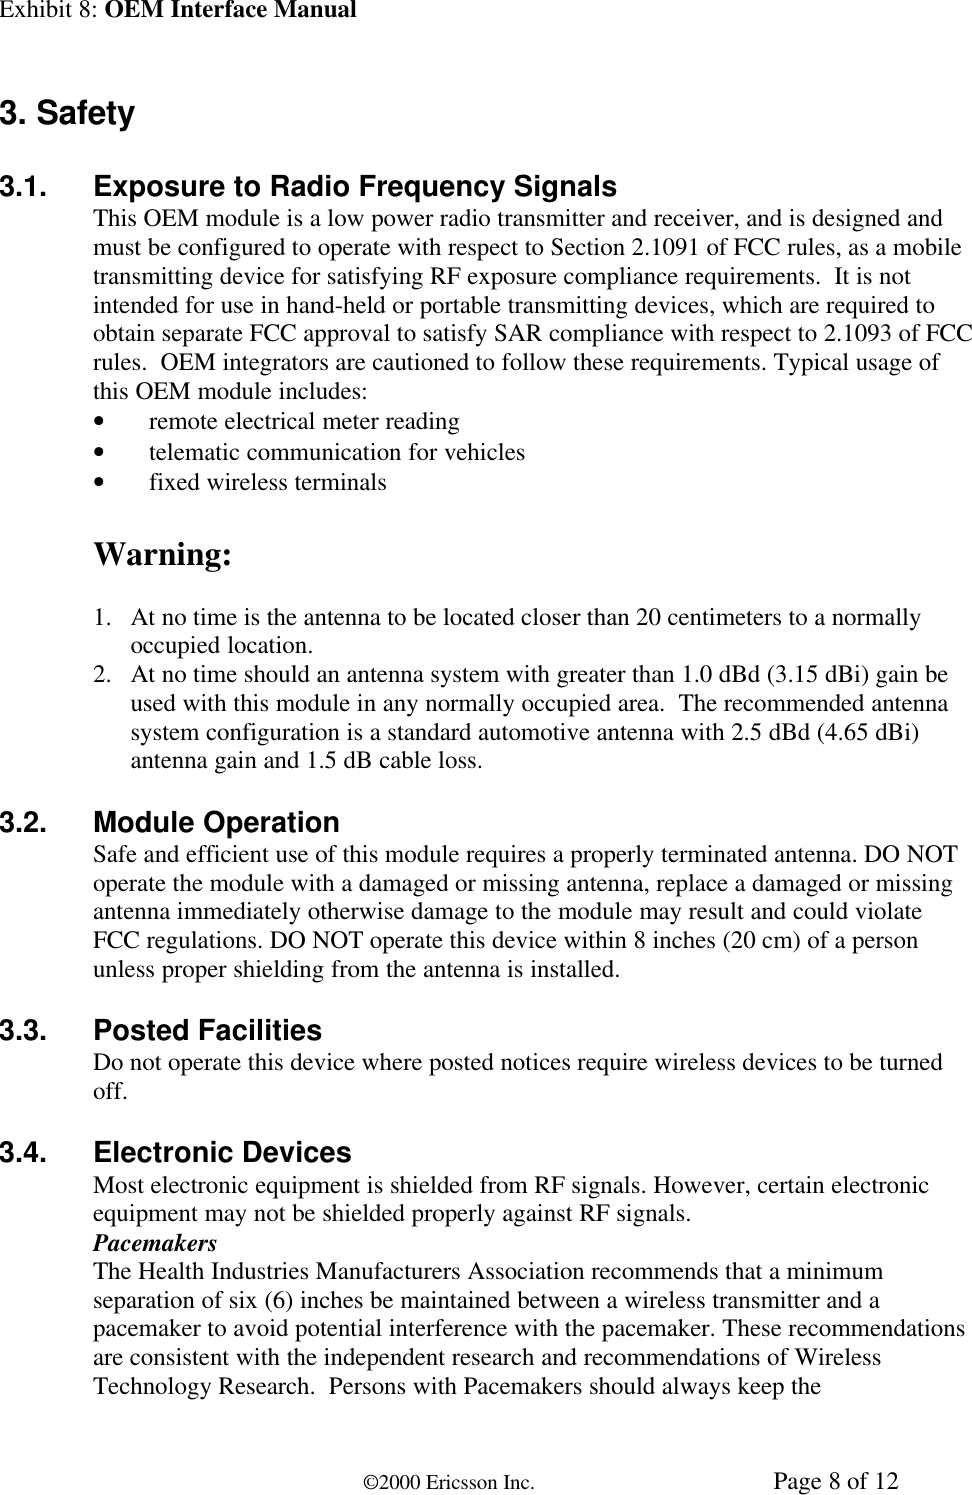 Exhibit 8: OEM Interface Manual©2000 Ericsson Inc. Page 8 of 123. Safety3.1. Exposure to Radio Frequency SignalsThis OEM module is a low power radio transmitter and receiver, and is designed andmust be configured to operate with respect to Section 2.1091 of FCC rules, as a mobiletransmitting device for satisfying RF exposure compliance requirements.  It is notintended for use in hand-held or portable transmitting devices, which are required toobtain separate FCC approval to satisfy SAR compliance with respect to 2.1093 of FCCrules.  OEM integrators are cautioned to follow these requirements. Typical usage ofthis OEM module includes:• remote electrical meter reading• telematic communication for vehicles• fixed wireless terminalsWarning:1. At no time is the antenna to be located closer than 20 centimeters to a normallyoccupied location.2. At no time should an antenna system with greater than 1.0 dBd (3.15 dBi) gain beused with this module in any normally occupied area.  The recommended antennasystem configuration is a standard automotive antenna with 2.5 dBd (4.65 dBi)antenna gain and 1.5 dB cable loss.3.2. Module OperationSafe and efficient use of this module requires a properly terminated antenna. DO NOToperate the module with a damaged or missing antenna, replace a damaged or missingantenna immediately otherwise damage to the module may result and could violateFCC regulations. DO NOT operate this device within 8 inches (20 cm) of a personunless proper shielding from the antenna is installed.3.3. Posted FacilitiesDo not operate this device where posted notices require wireless devices to be turnedoff.3.4. Electronic DevicesMost electronic equipment is shielded from RF signals. However, certain electronicequipment may not be shielded properly against RF signals.PacemakersThe Health Industries Manufacturers Association recommends that a minimumseparation of six (6) inches be maintained between a wireless transmitter and apacemaker to avoid potential interference with the pacemaker. These recommendationsare consistent with the independent research and recommendations of WirelessTechnology Research.  Persons with Pacemakers should always keep the